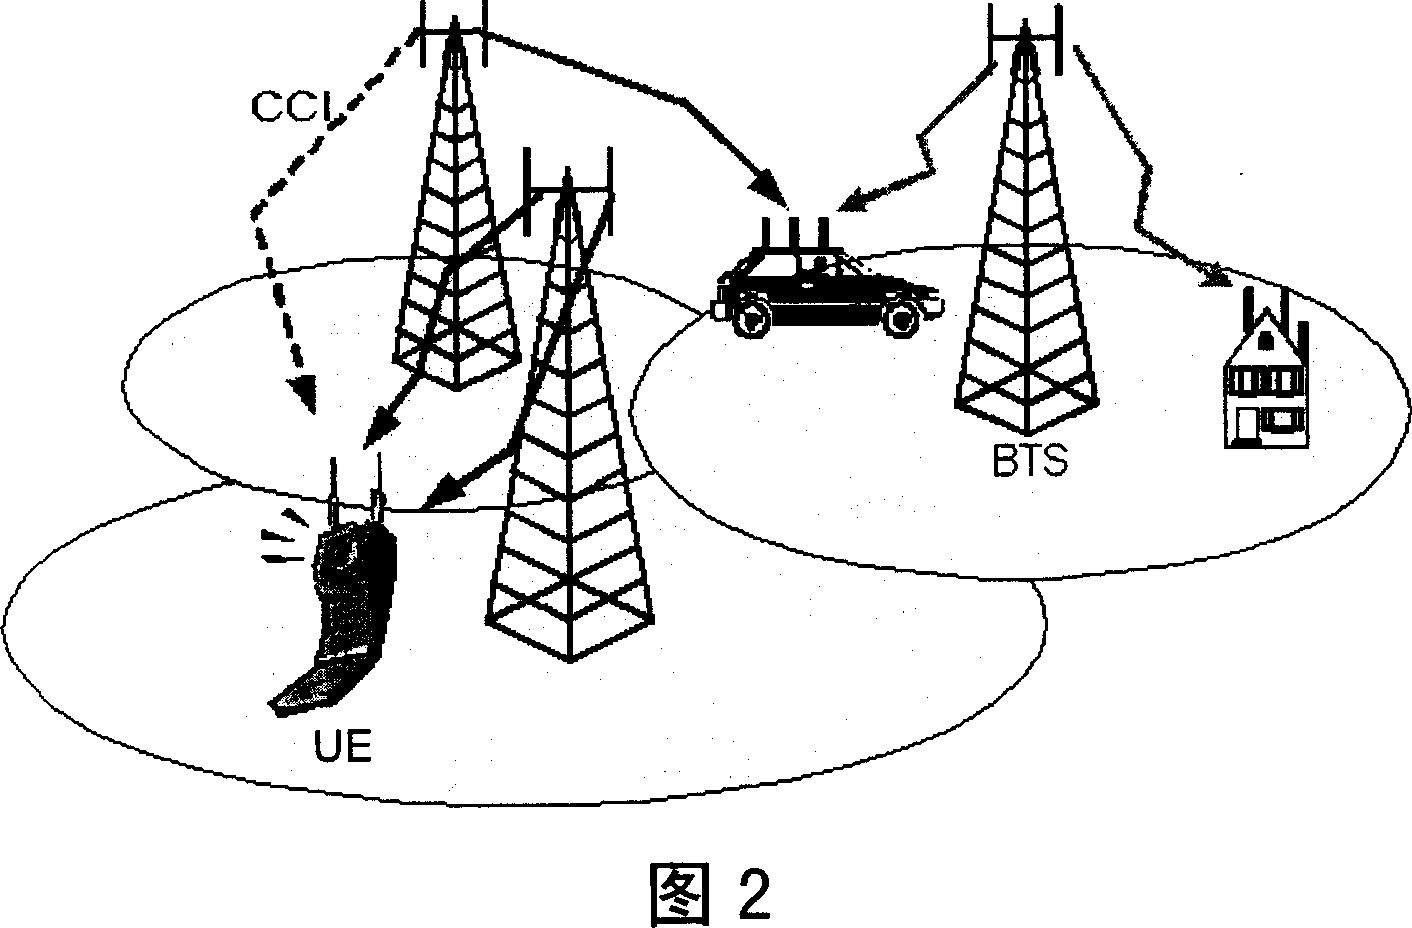 Uplink sub-macro method used for multiantenna, orthogonal frequency division multiple access cellular system